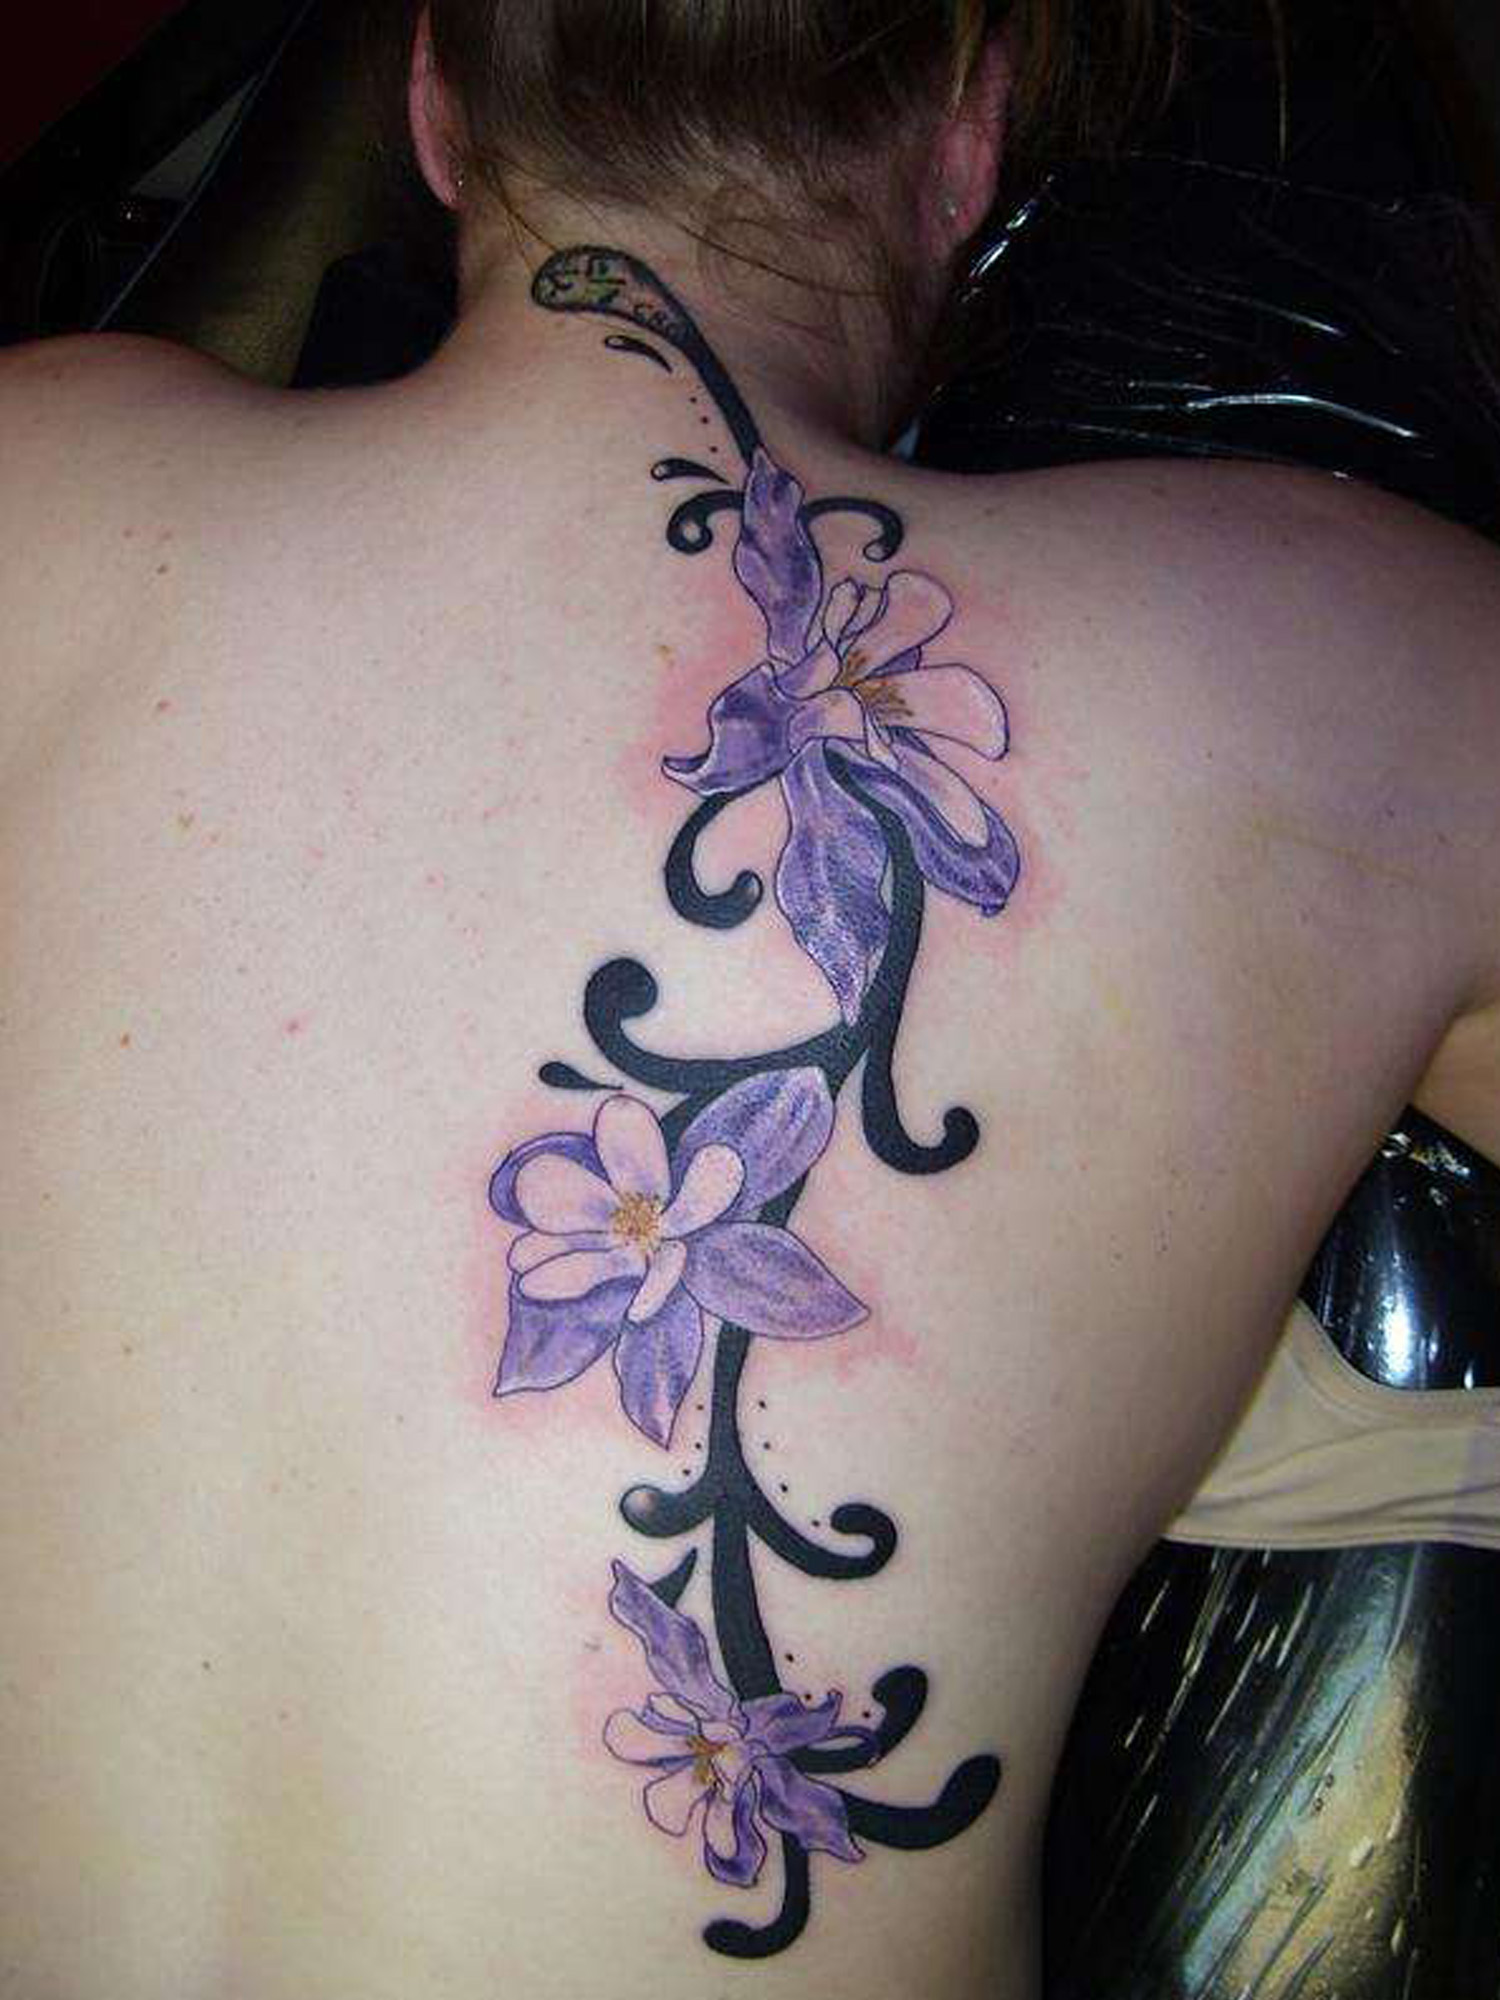 Flower tattoos for girls are